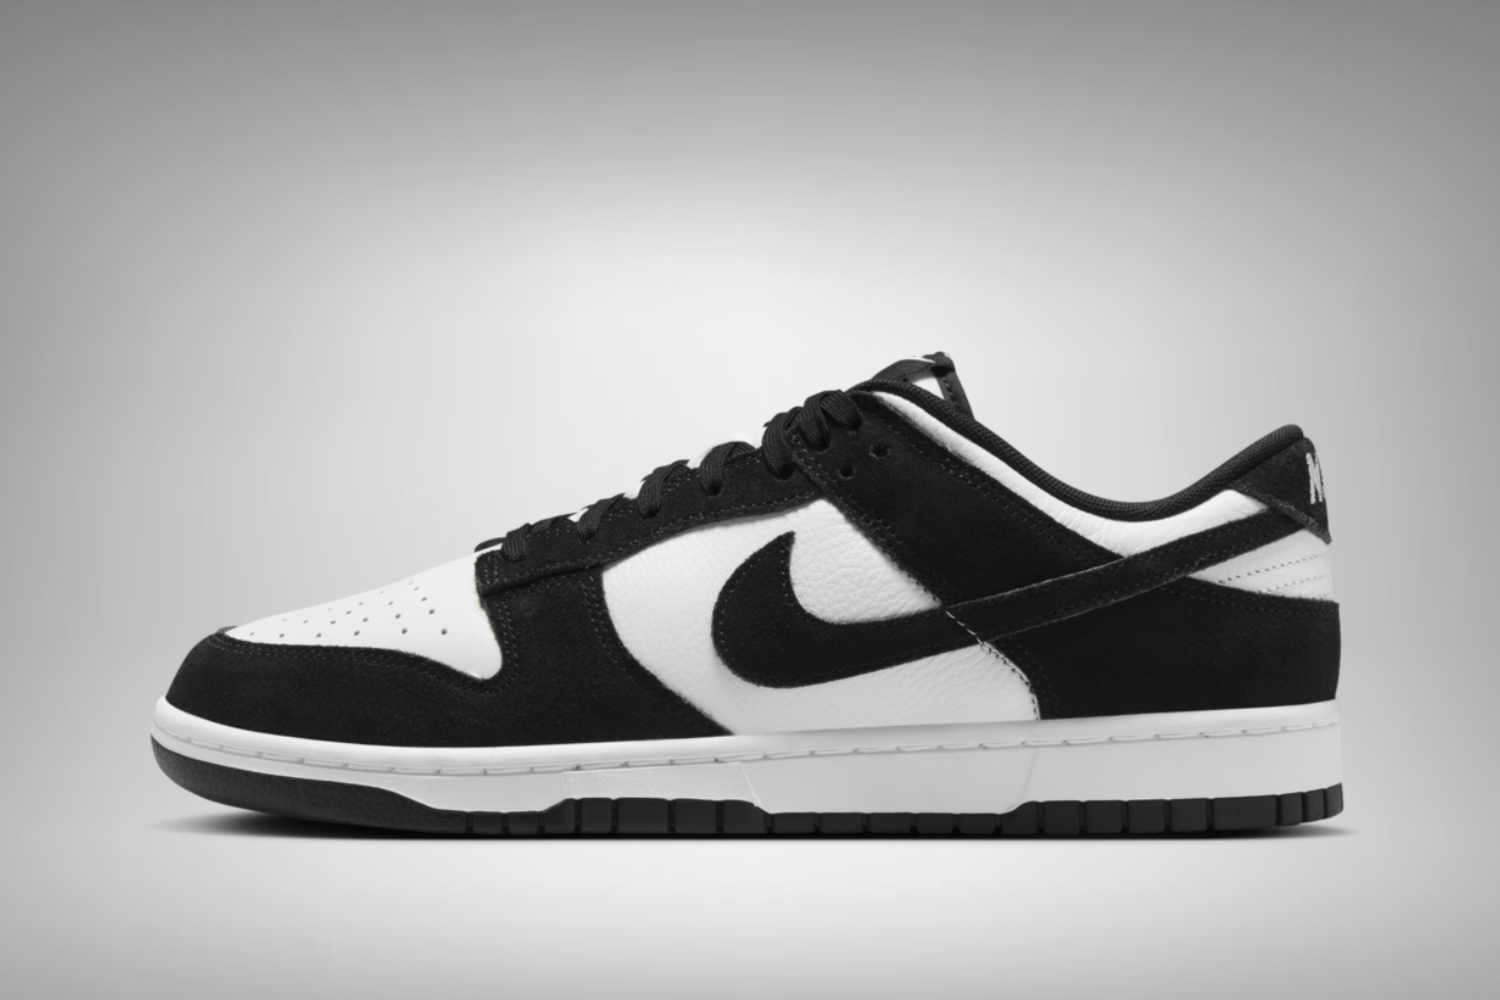 Nike reintroduces the Dunk Low 'Panda' in suede